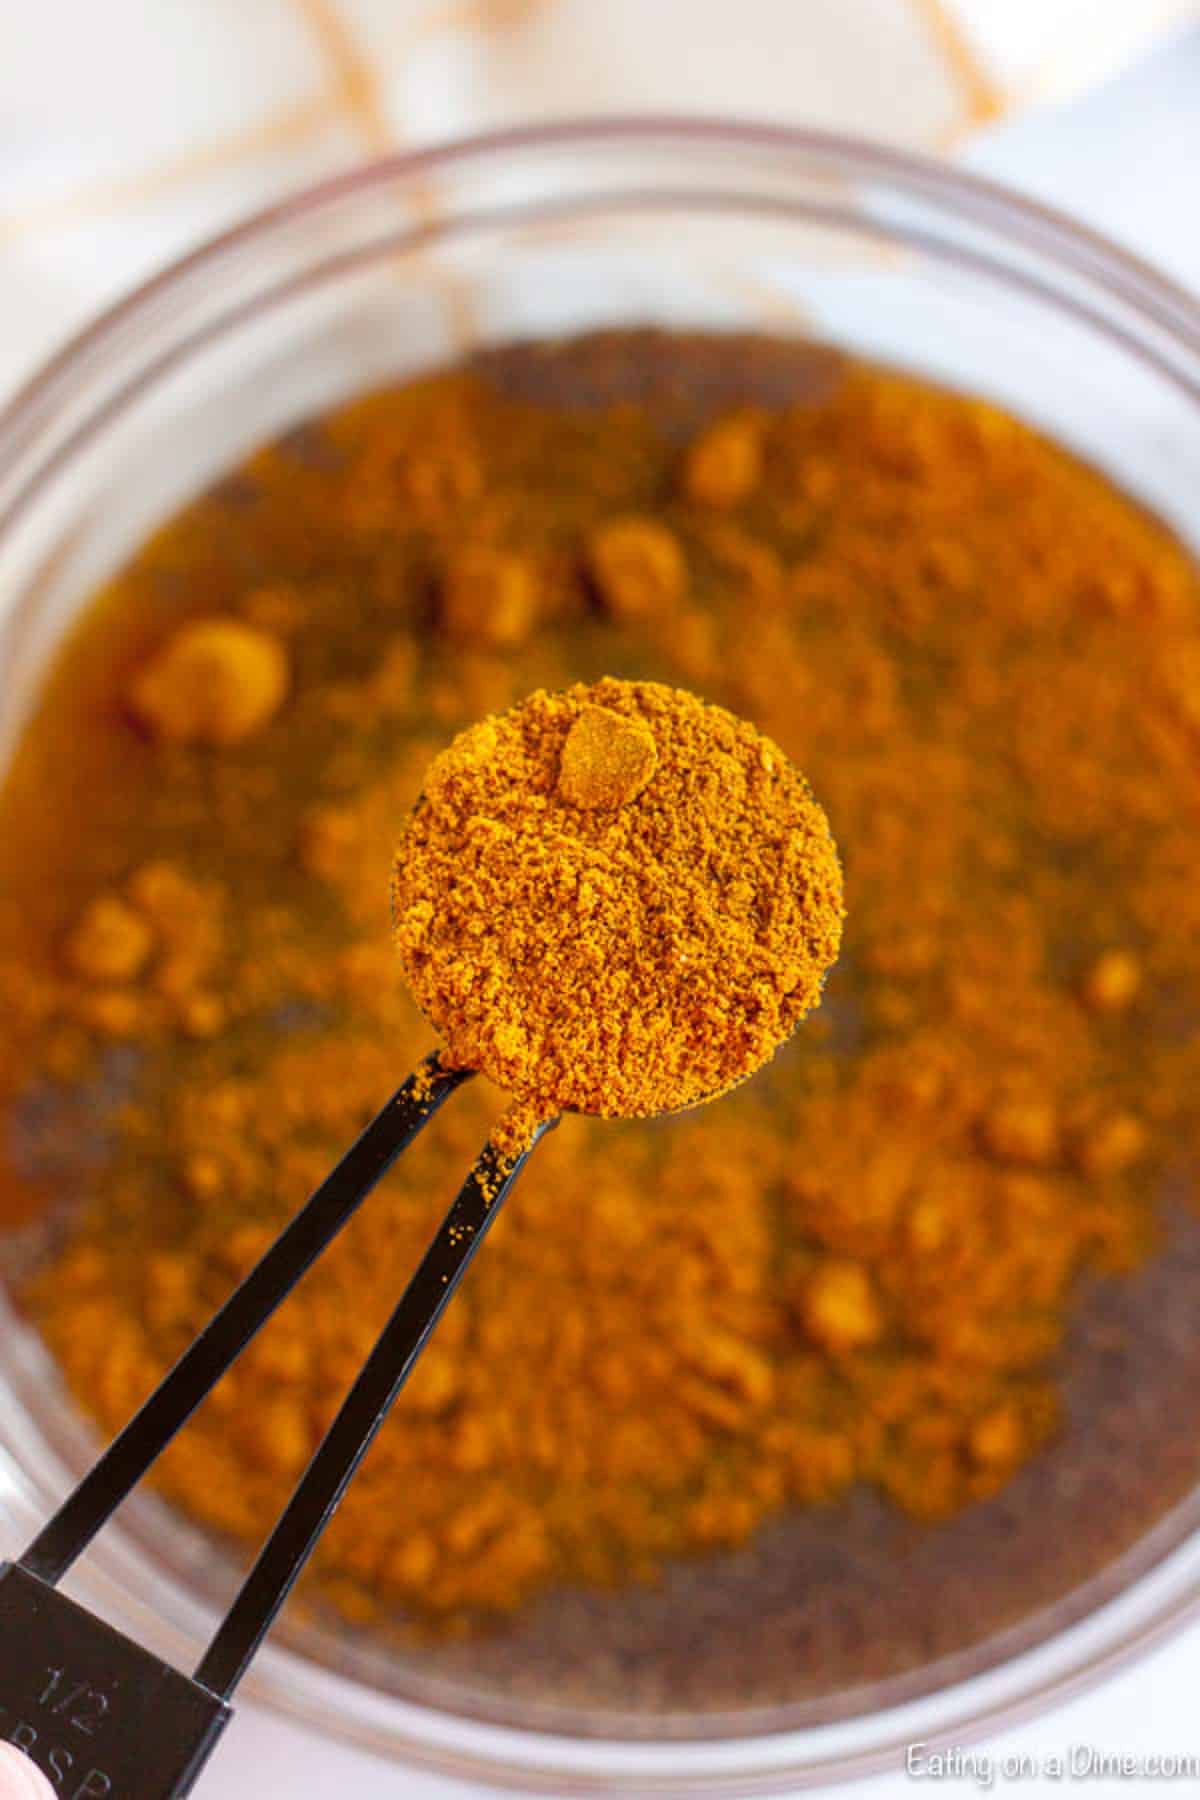 Table spoon of curry powder being added to the bowl of seasoning